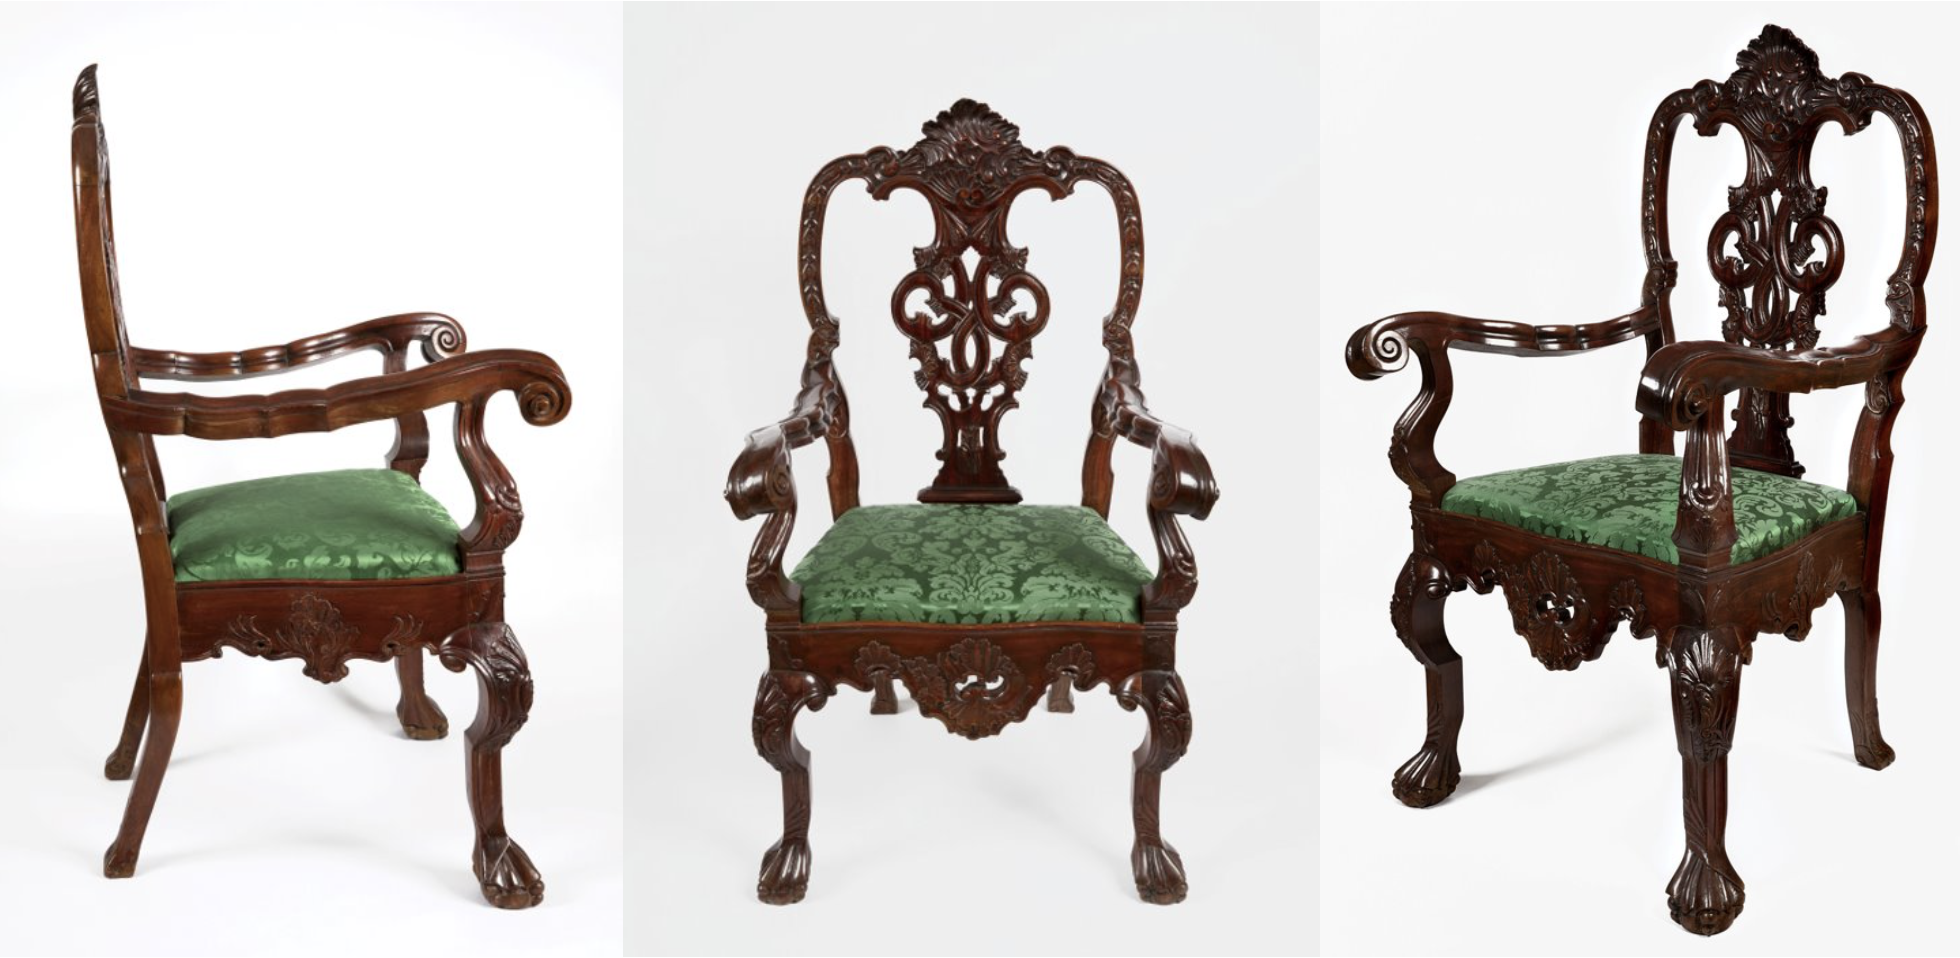 Side, front, and 45 degree angle views of an ornately carved dark wood chair with green fabric cushion